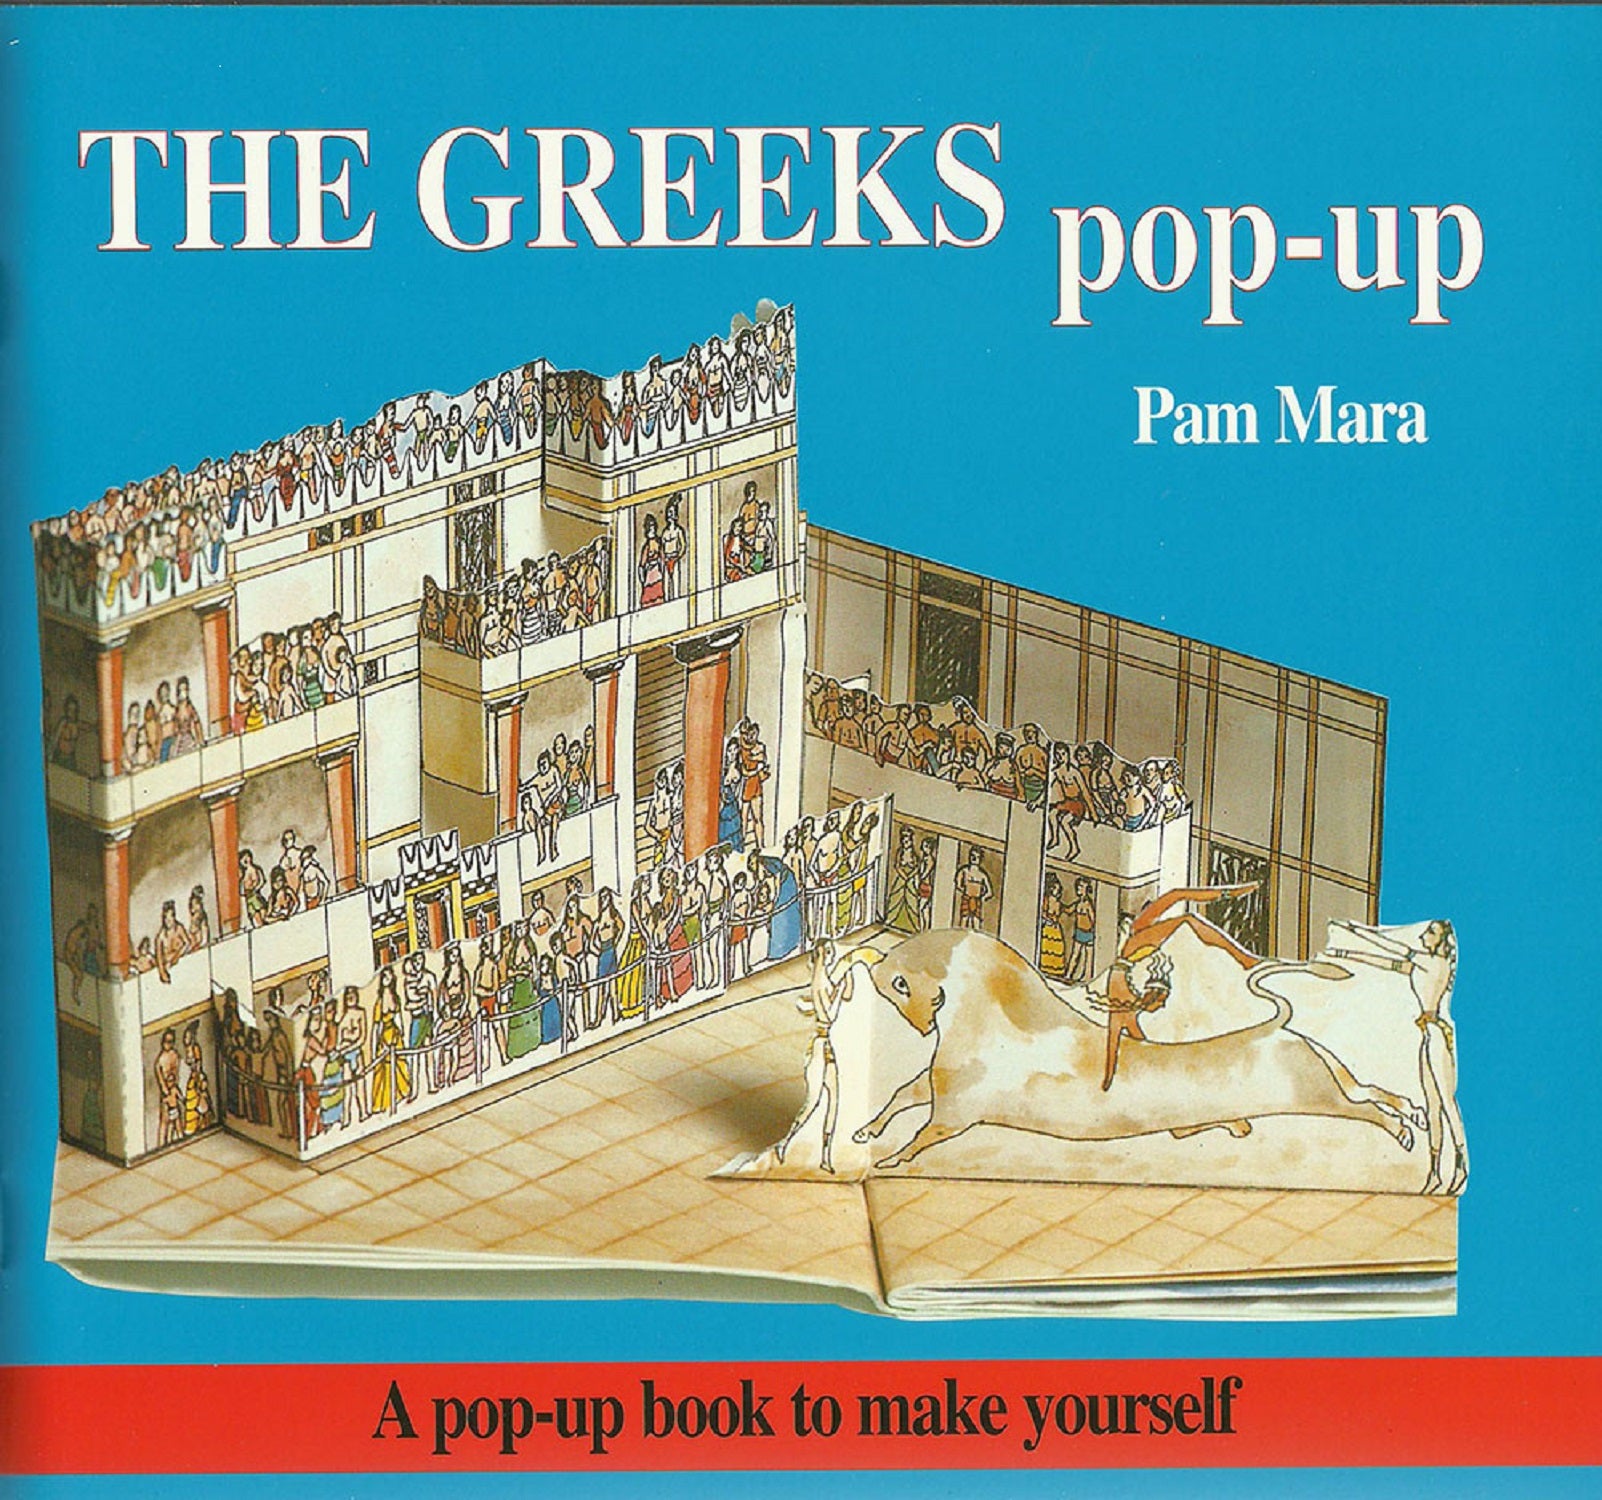 The Greeks Pop-up - A pop-up book to make yourself